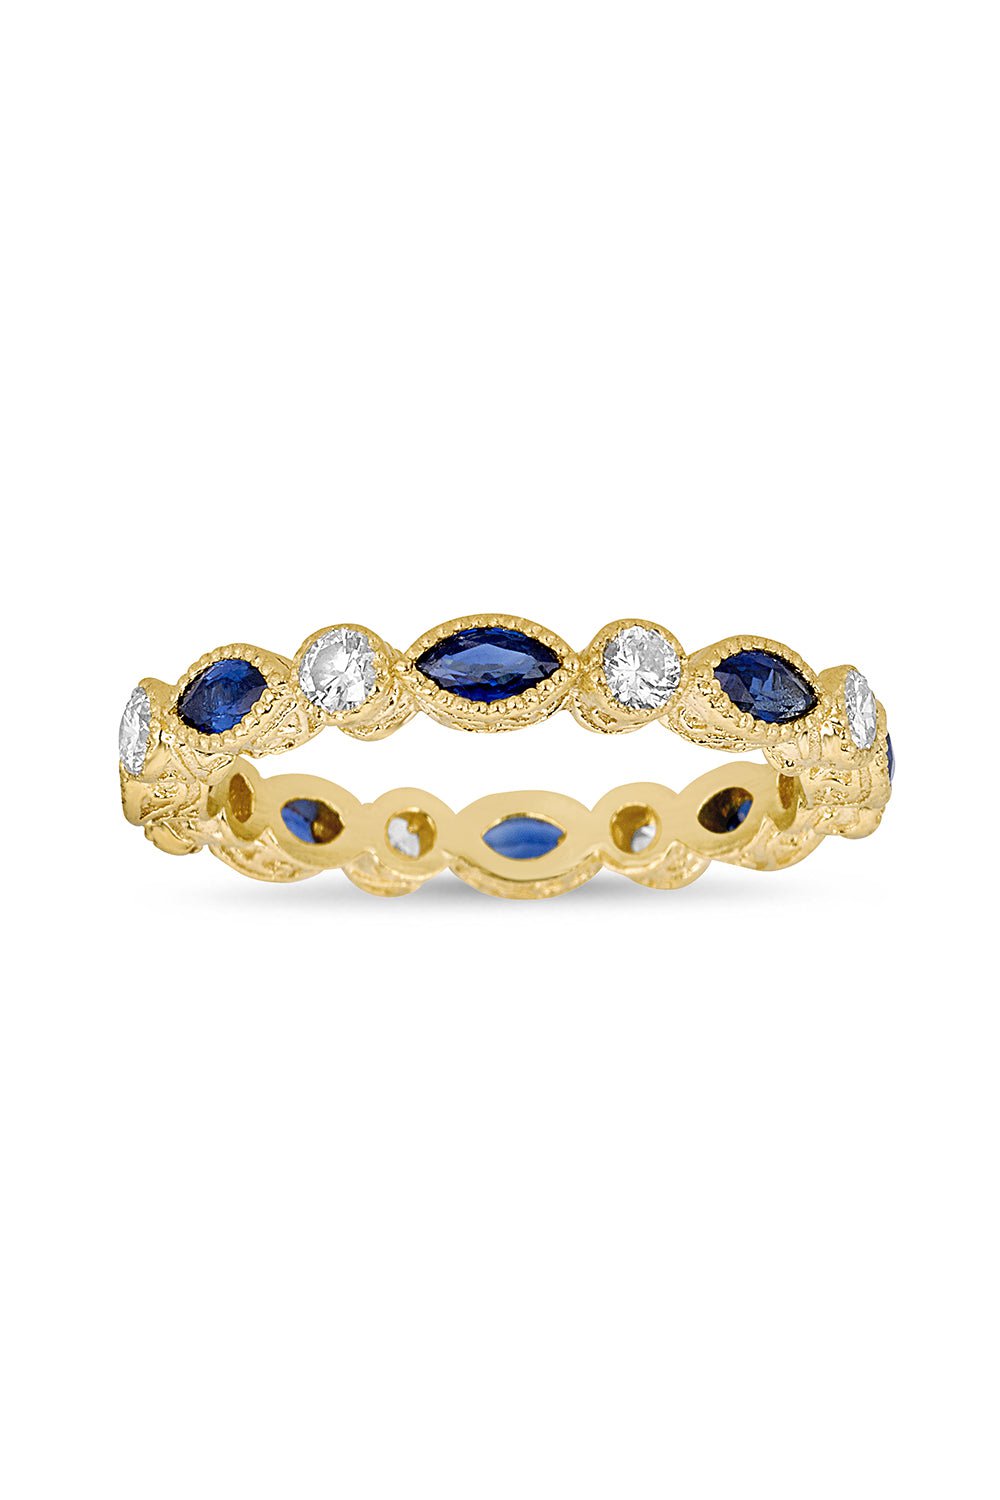 TANYA FARAH-Modenr Etruscan Blue Sapphire Marquise Diamond Stack Ring-YELLOW GOLD